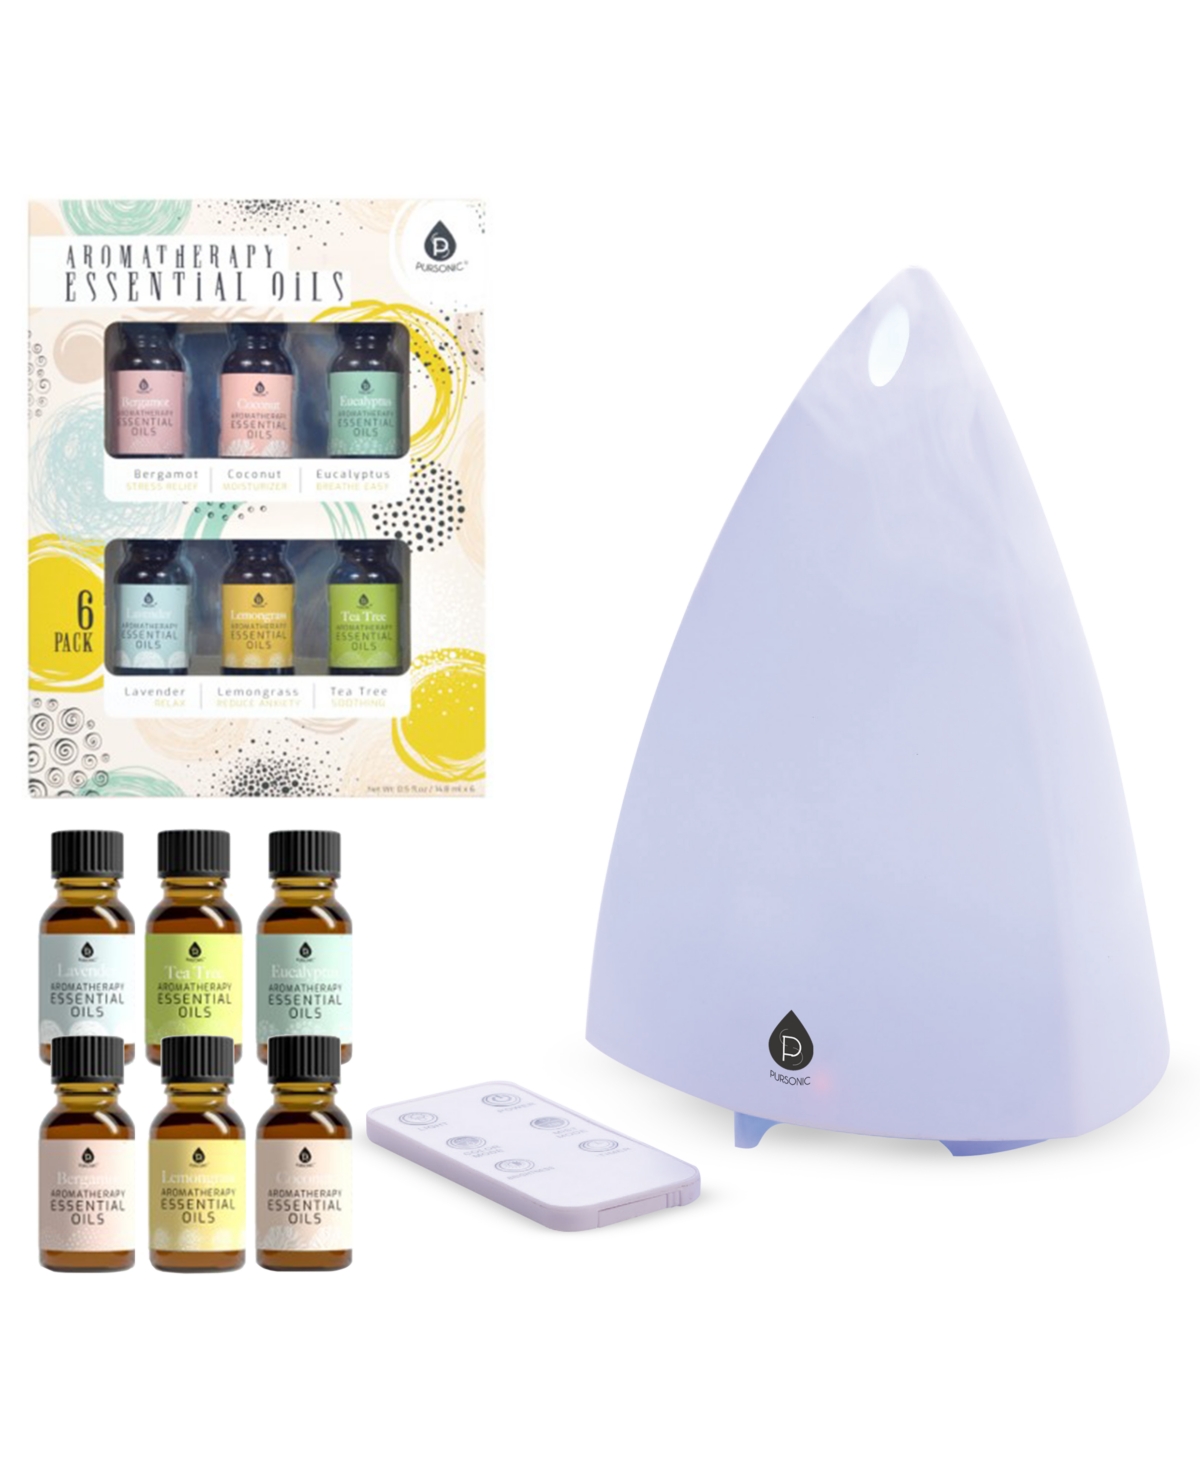 Ultimate Aromatherapy Experience: Essential Oil Diffuser & 6-Pack Aromatherapy Oils with Remote Control - White